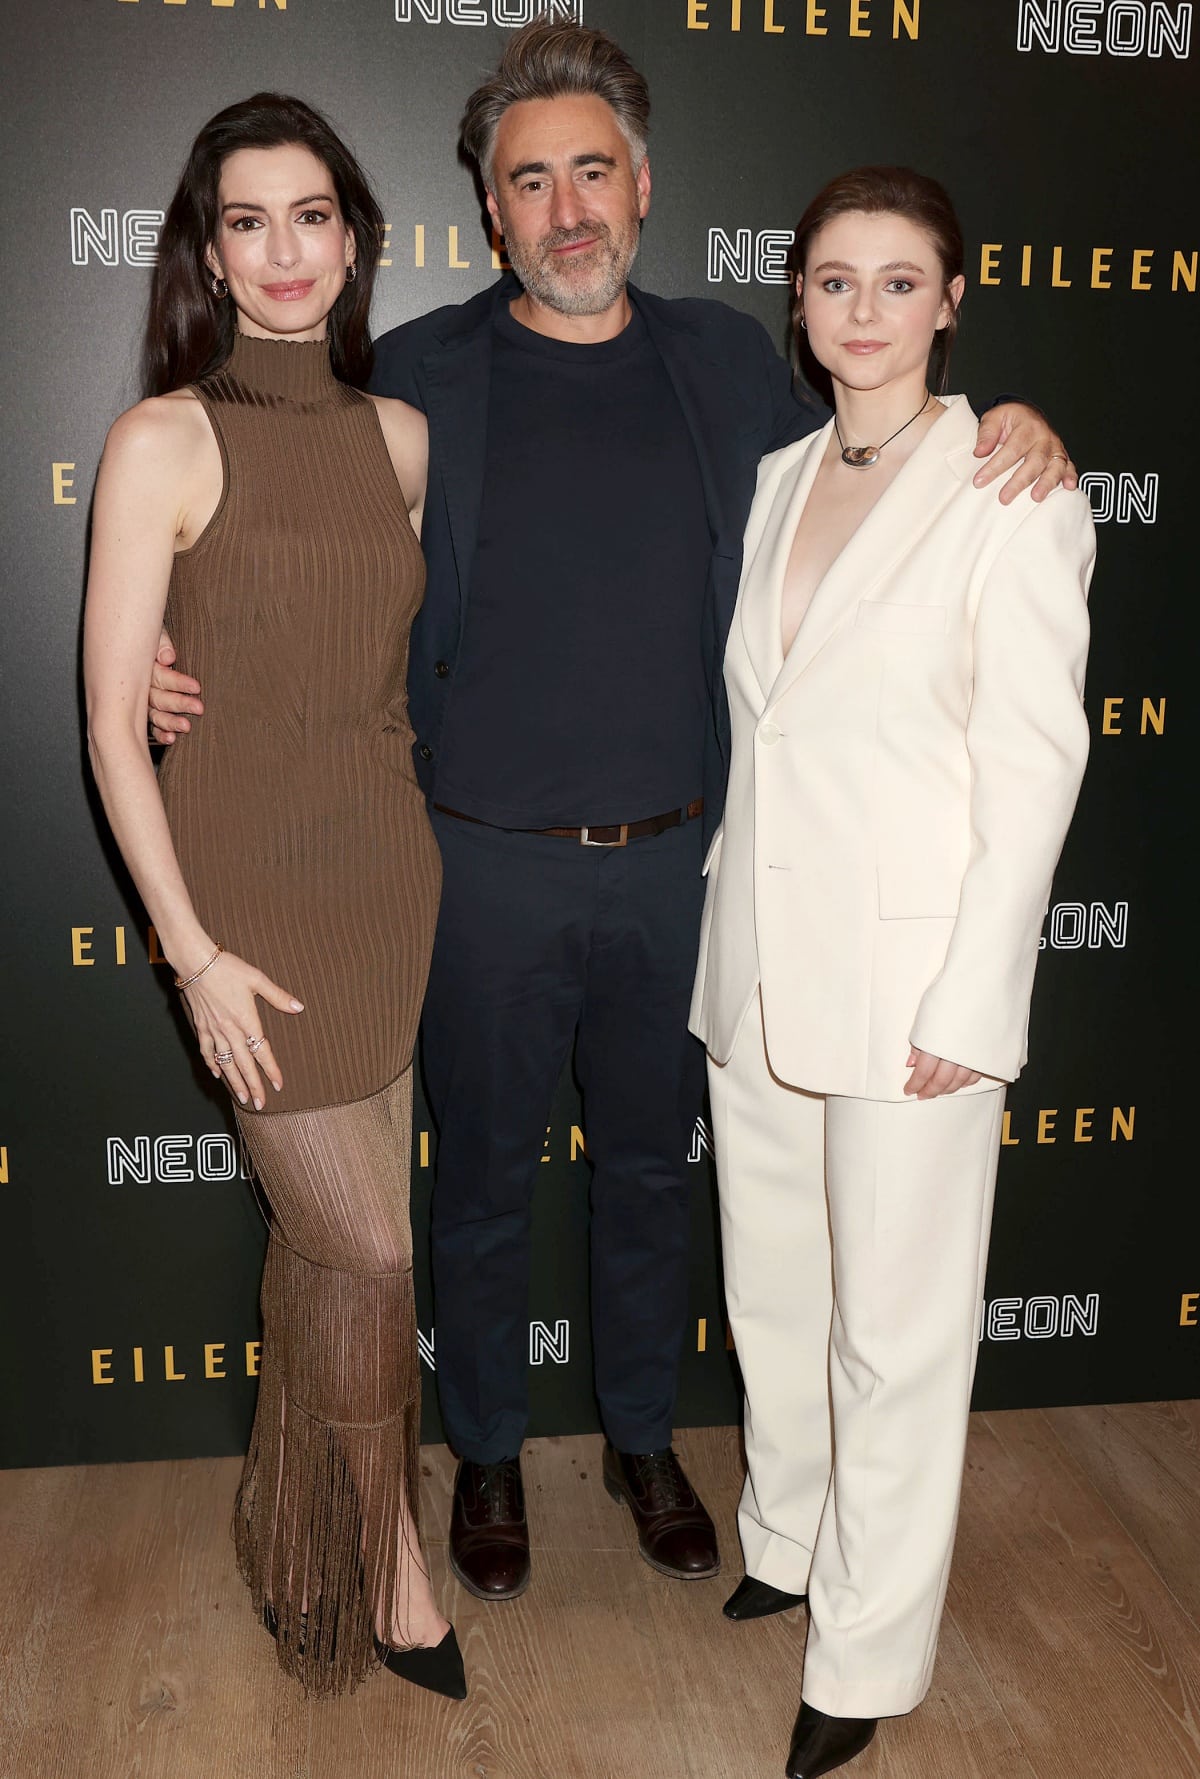 Anne Hathaway and Thomasin McKenzie with director William Oldroyd at the New York special screening of Eileen